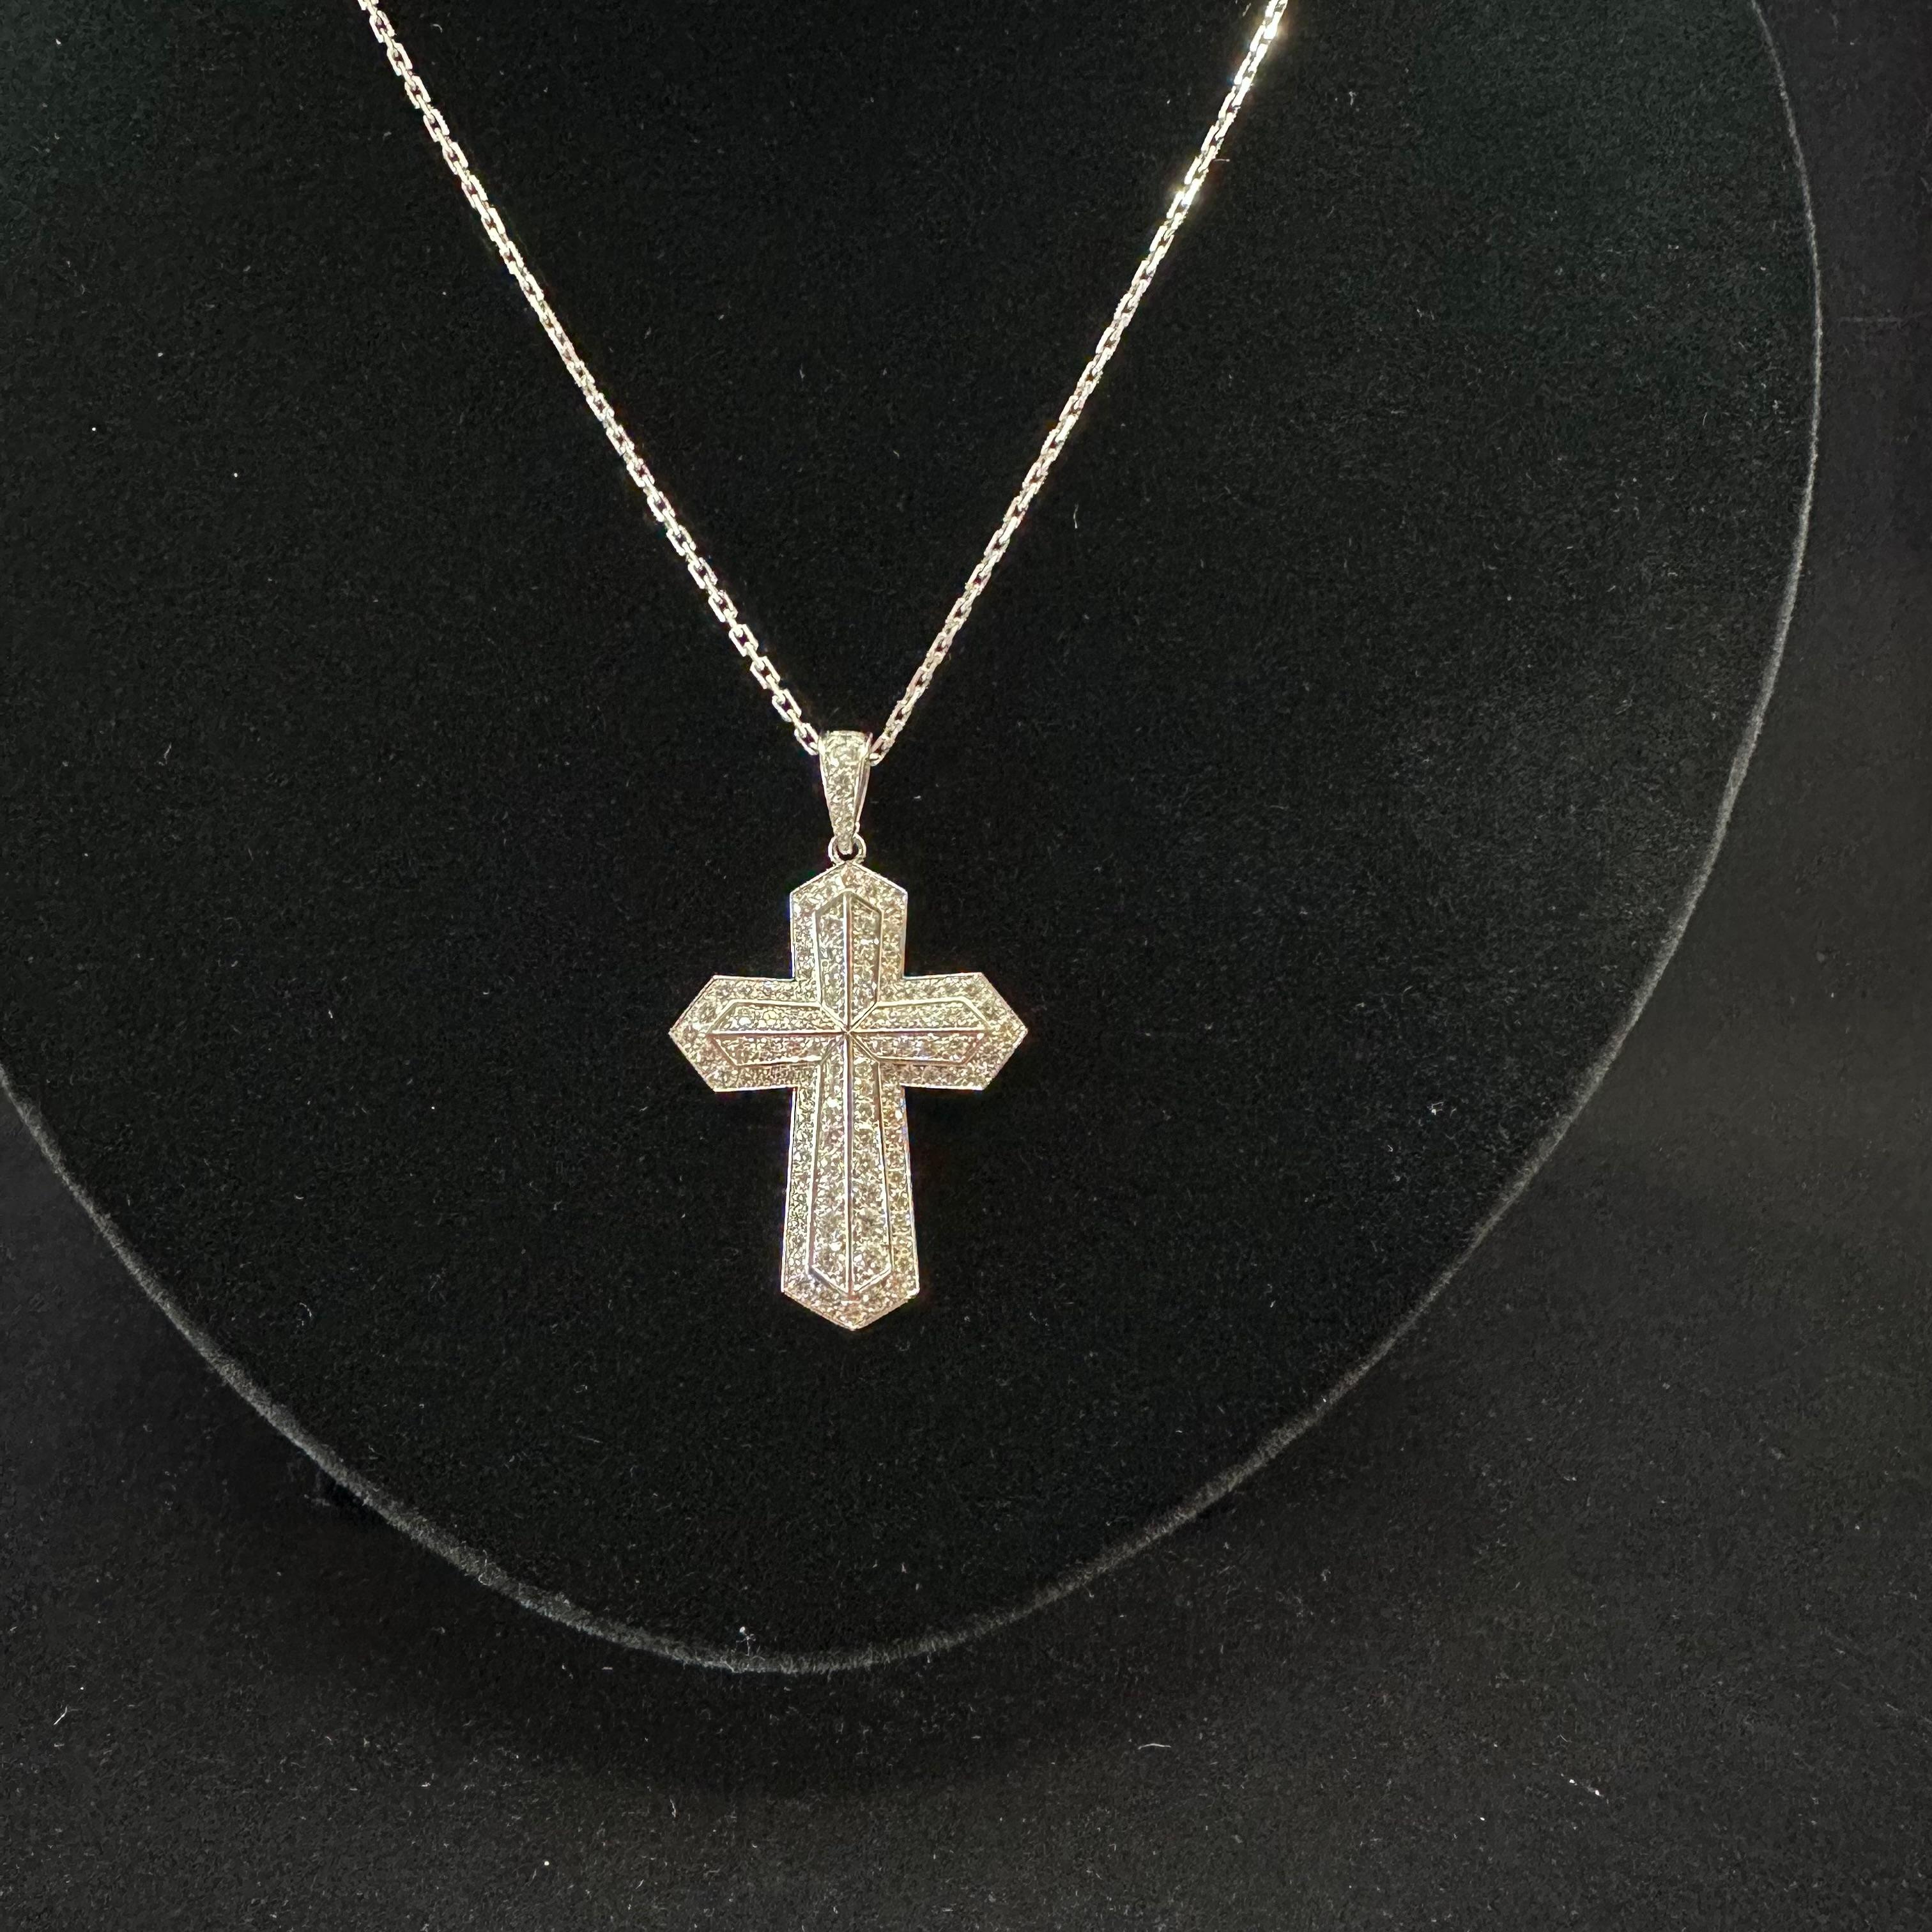 Cartier, Paris, Pave Diamond Cross
2 inches by 1 inch 
Est, 90 Diamonds 2.50 cts TW
French Hallmarks of the workshop and Cartier & numbers plus other stamps see pictures.
The Cross Can Be Removed from the  16.5 inch Chain.
Excellent Condition.


